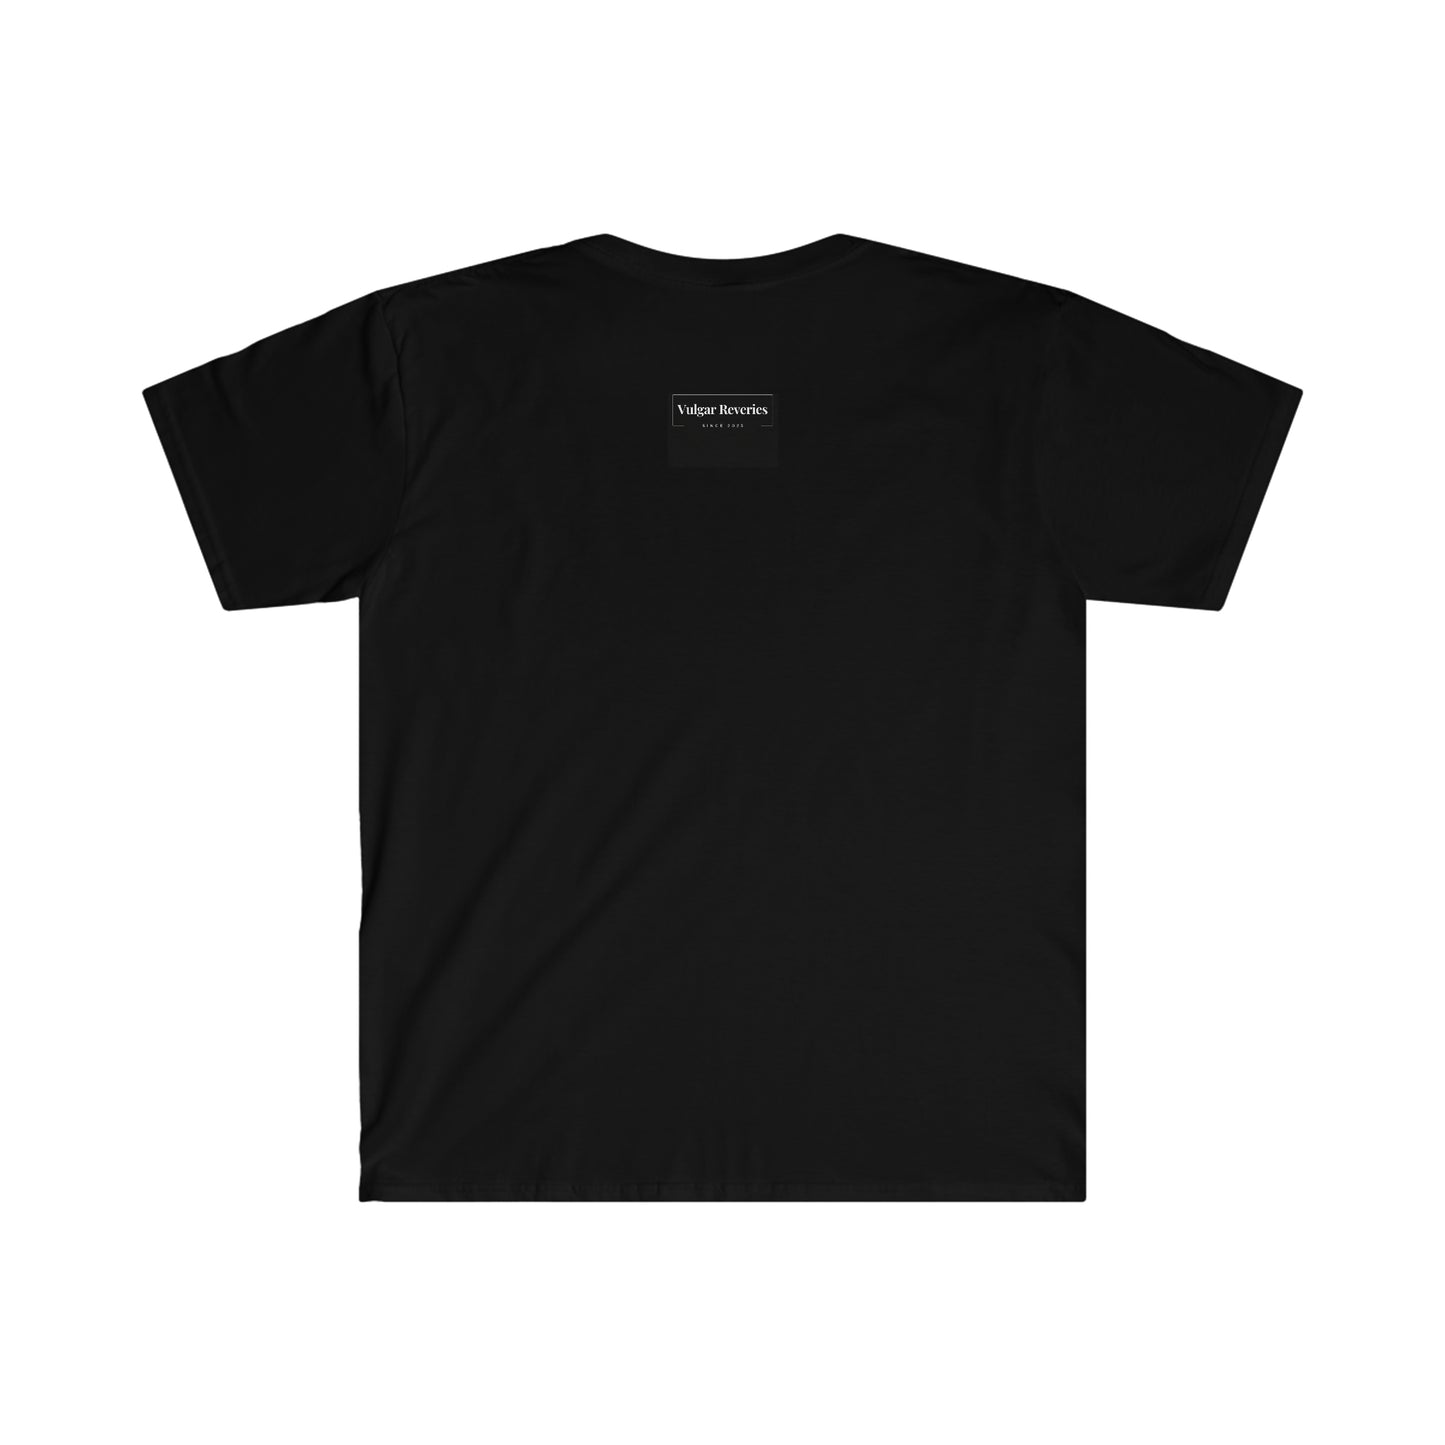 Say The Word - Unisex Softstyle T-Shirt BLK